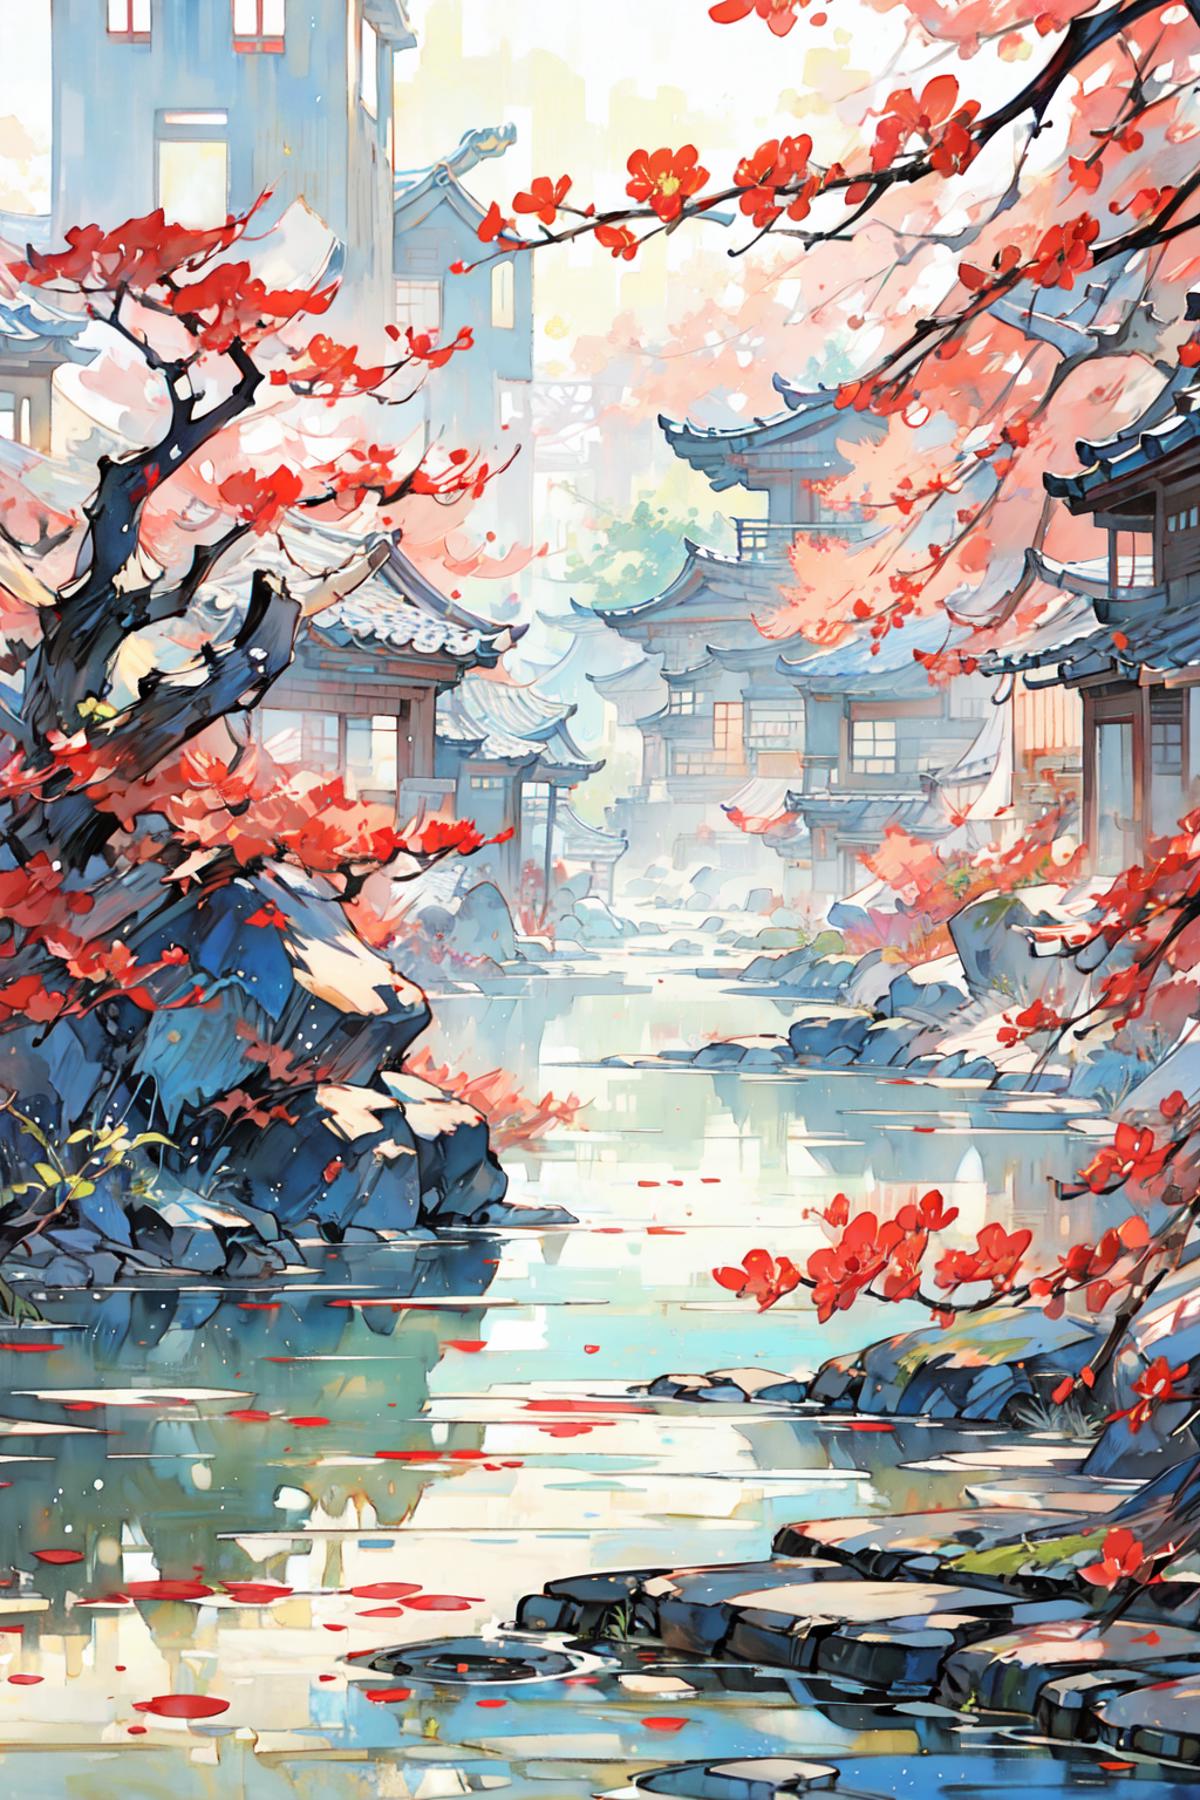 An Artistic Illustration of a Waterway with Asian-Inspired Buildings and Cherry Blossoms